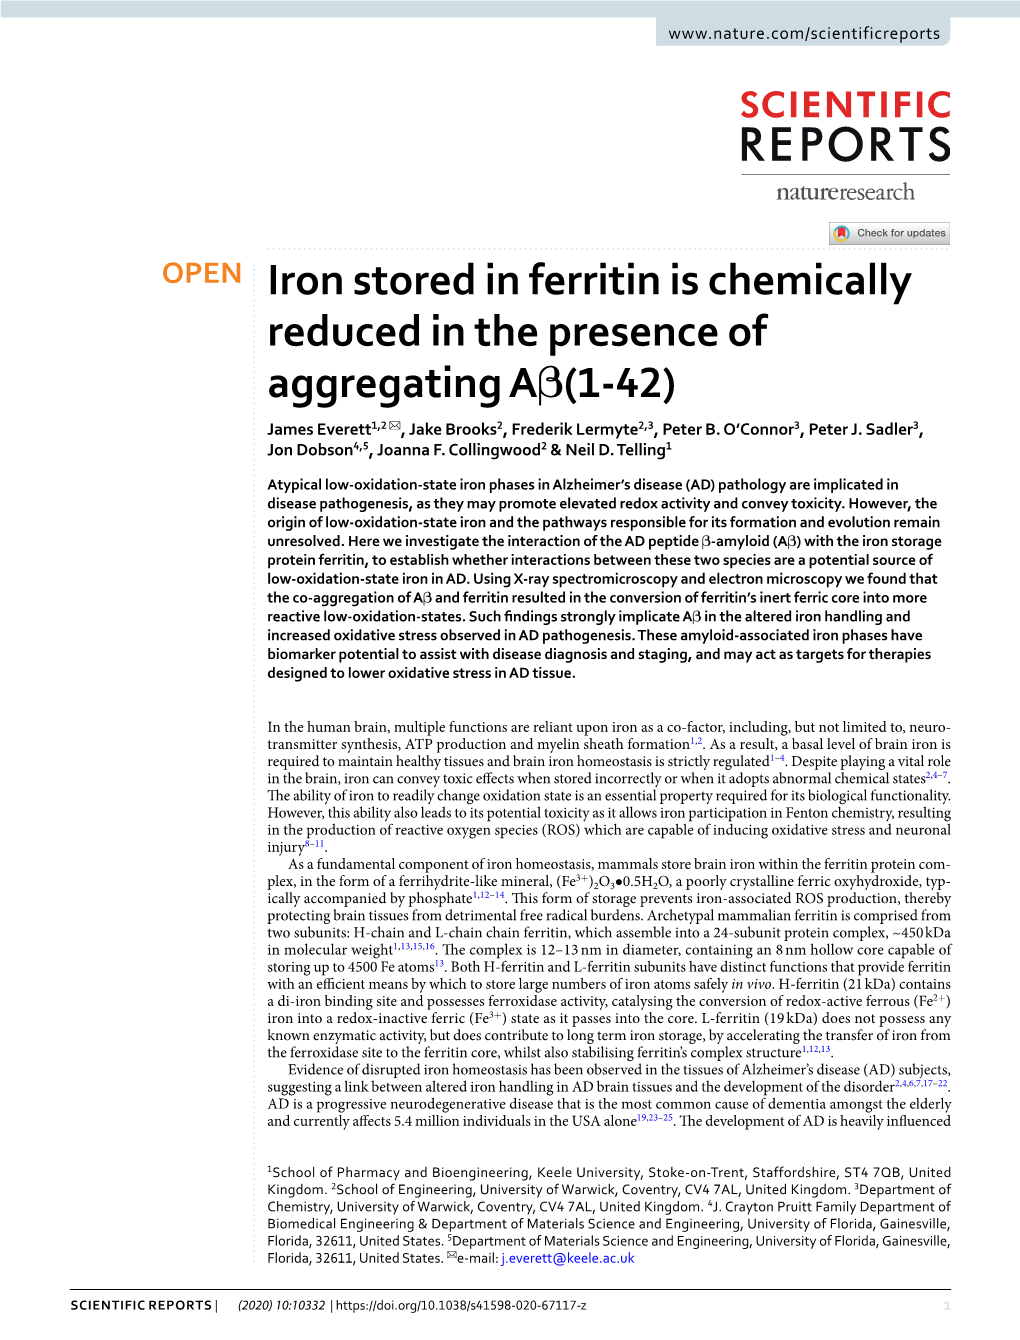 Iron Stored in Ferritin Is Chemically Reduced in the Presence of Aggregating Aβ(1-42) James Everett1,2 ✉ , Jake Brooks2, Frederik Lermyte2,3, Peter B